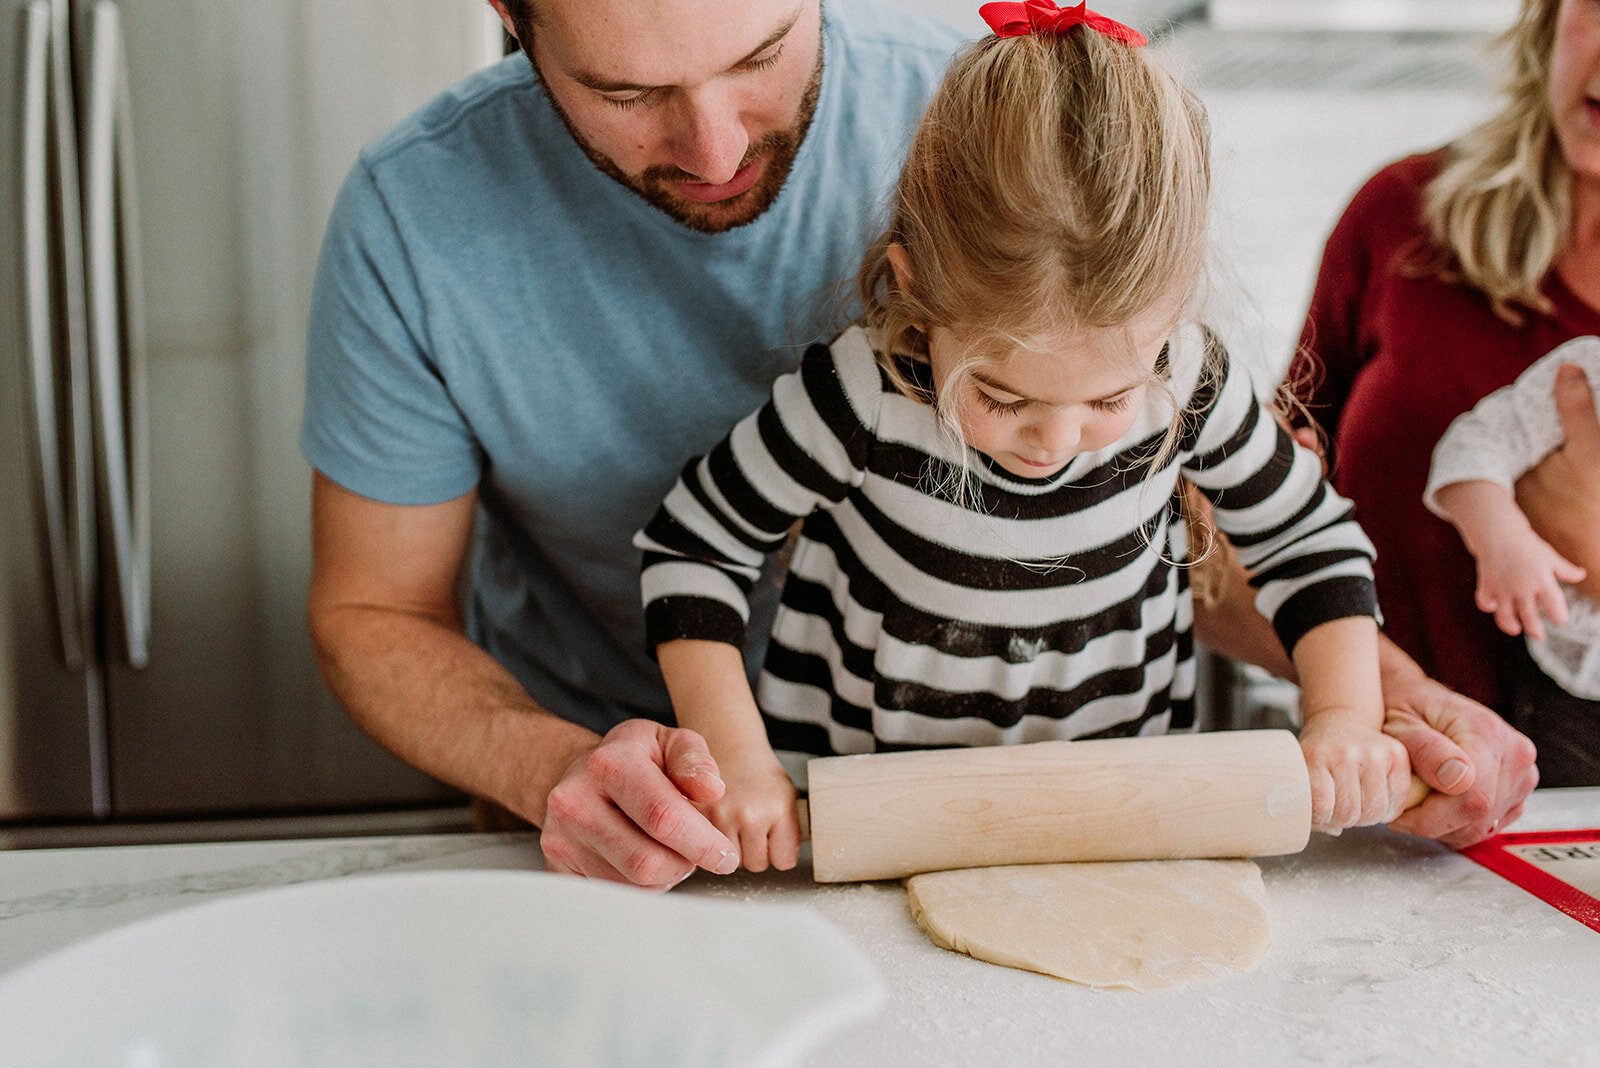 Toddler girl rolling cookie dough with her dad's help